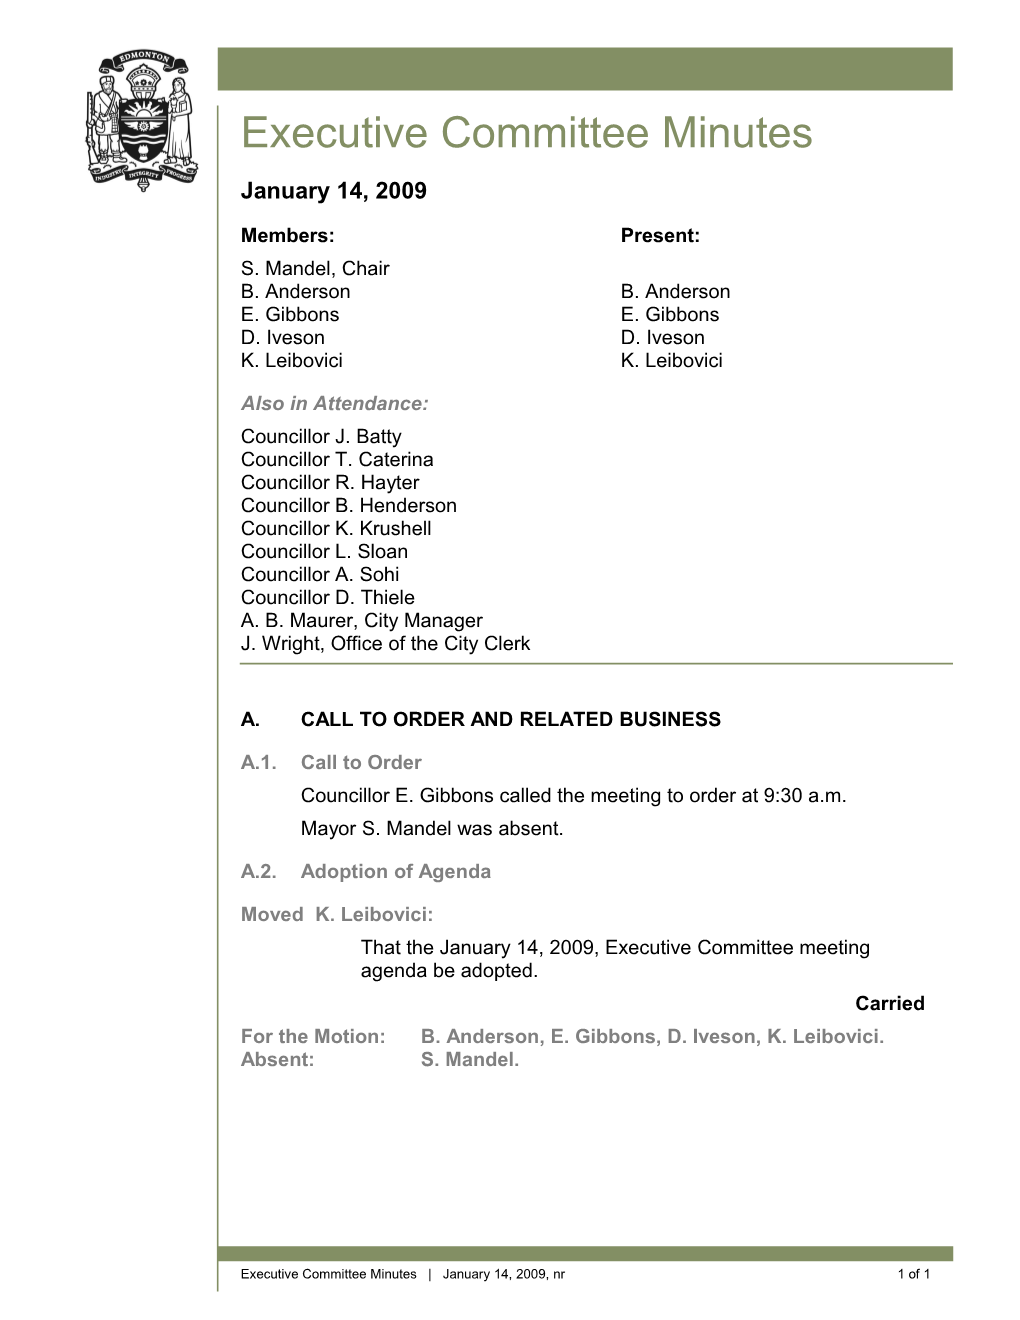 Minutes for Executive Committee January 14, 2009 Meeting